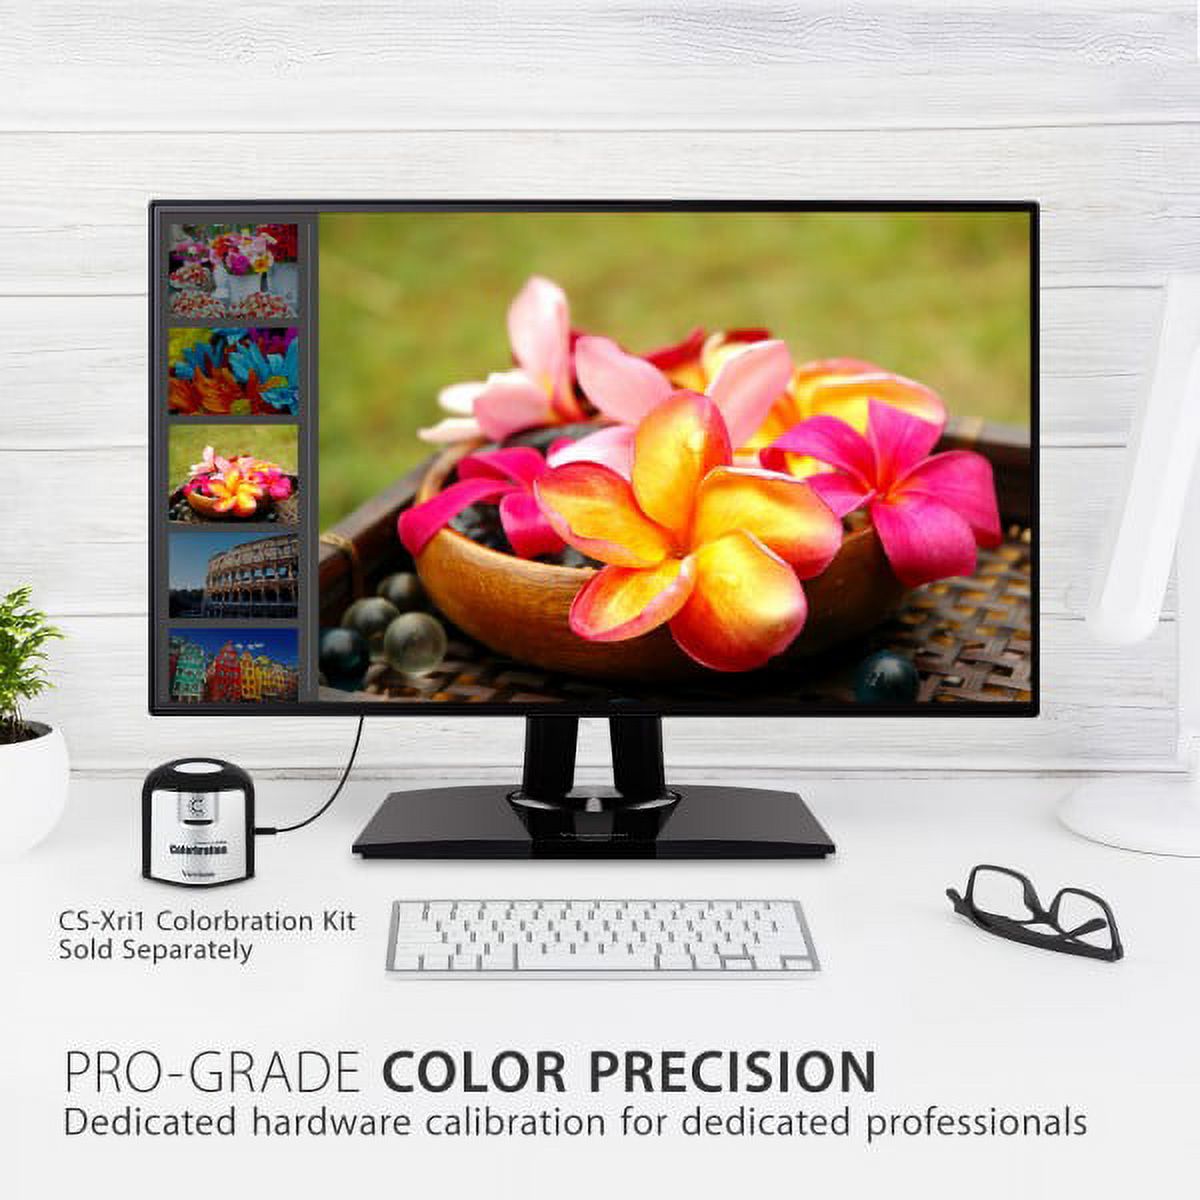 ViewSonic VP2468 24-Inch Premium IPS 1080p Monitor with Advanced Ergonomics, ColorPro 100% sRGB Rec 709, 14-bit 3D LUT, Eye Care, HDMI, USB, DP Daisy Chain for Home and Office - image 5 of 10